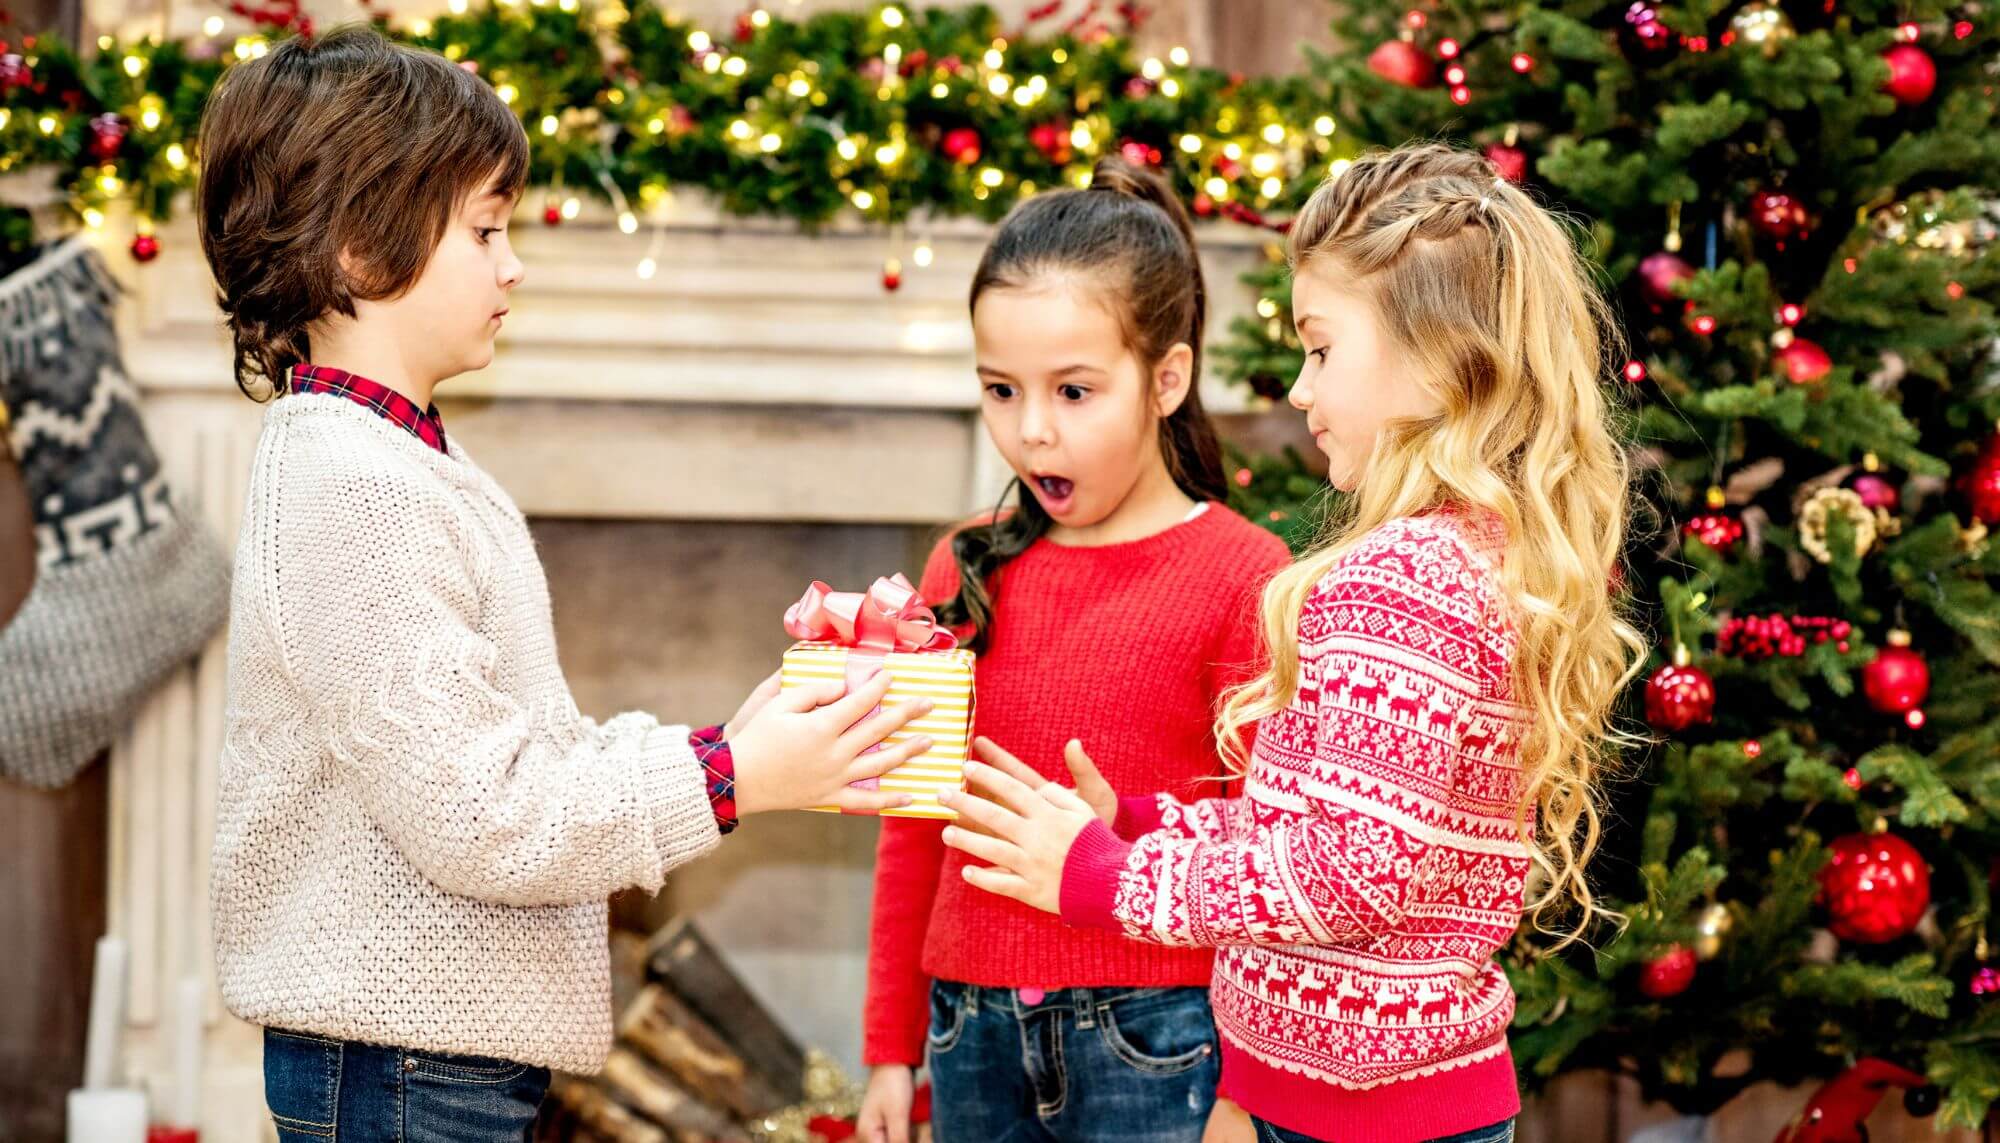 A child handing a wrapped gift to another child as another child looks on in surprise